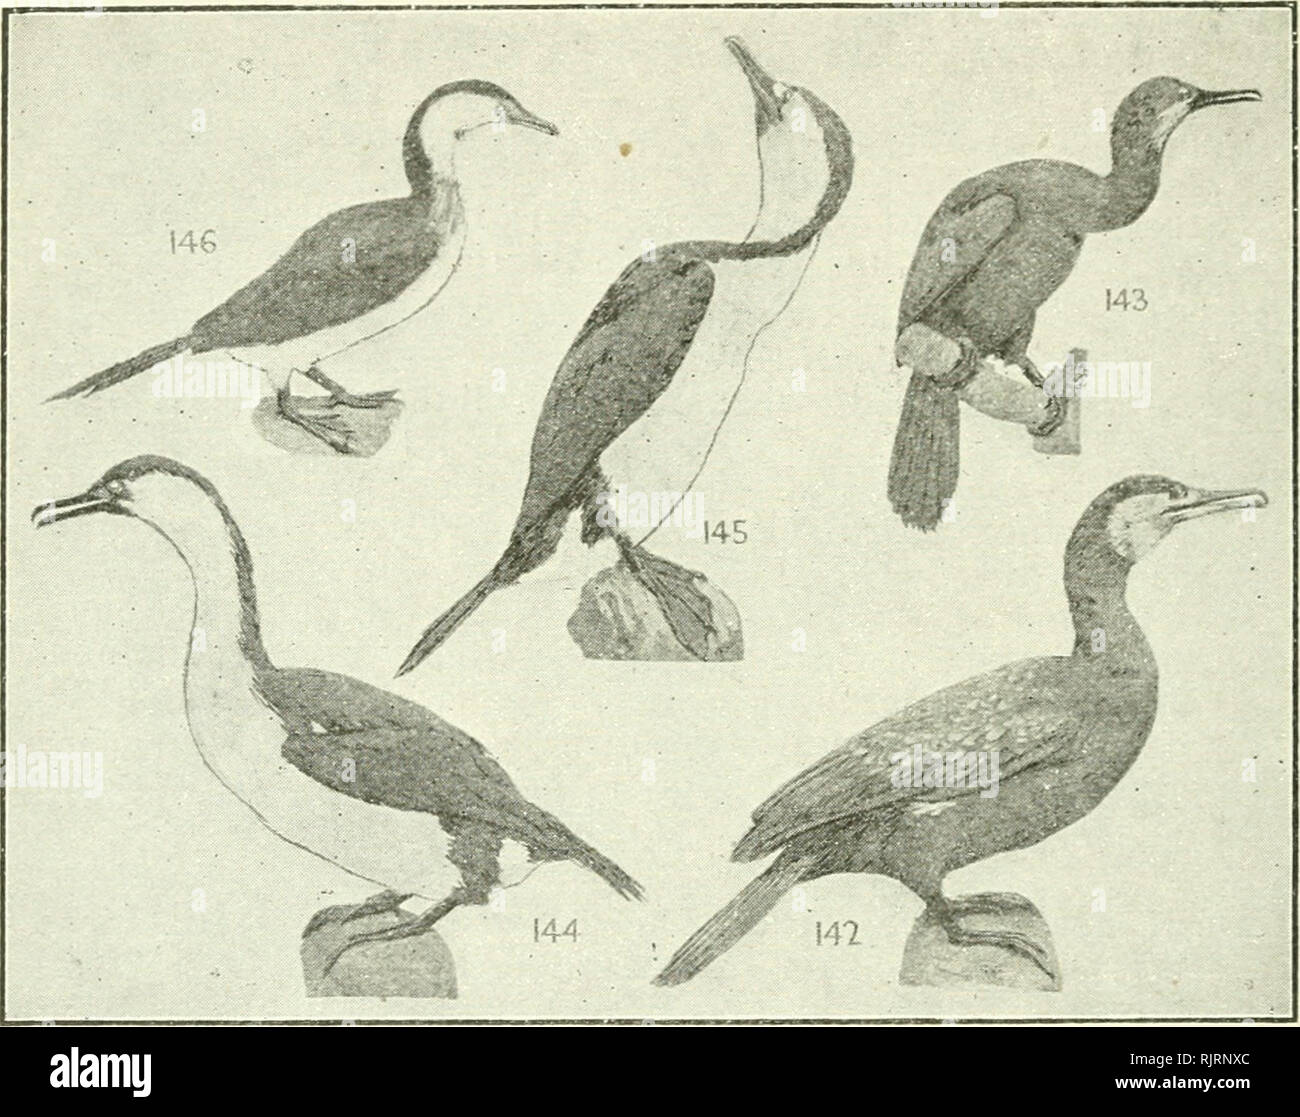 . An Australian bird book : a pocket book for field use. Birds -- Australia Identification. 68 AX AUSTRALIAN BIRD BOOK,. ORDER XIV.—PELICANIFORMES. F. 59. PHALACROCORACIDAE (5), CORMORANTS, 42 sp. —16 (14) A., 6(2)0., 7(3)P., 6(5)E., 10(4)Nc, 9(6)N1. 5 142 Cormorant, (Black), Black Shag, Phalacrocorax carbo. 42 A., T., N.Z., cos. exc. S. Am. c. lagoons, sea Glossy blackish-green; side of neck, face bully white; white oil thighs; f., sim. Fish. 35 being free. Representatives of the six families are found in Aus- tralia. These birds are fishers par excellence. In the first family come the well-k Stock Photo